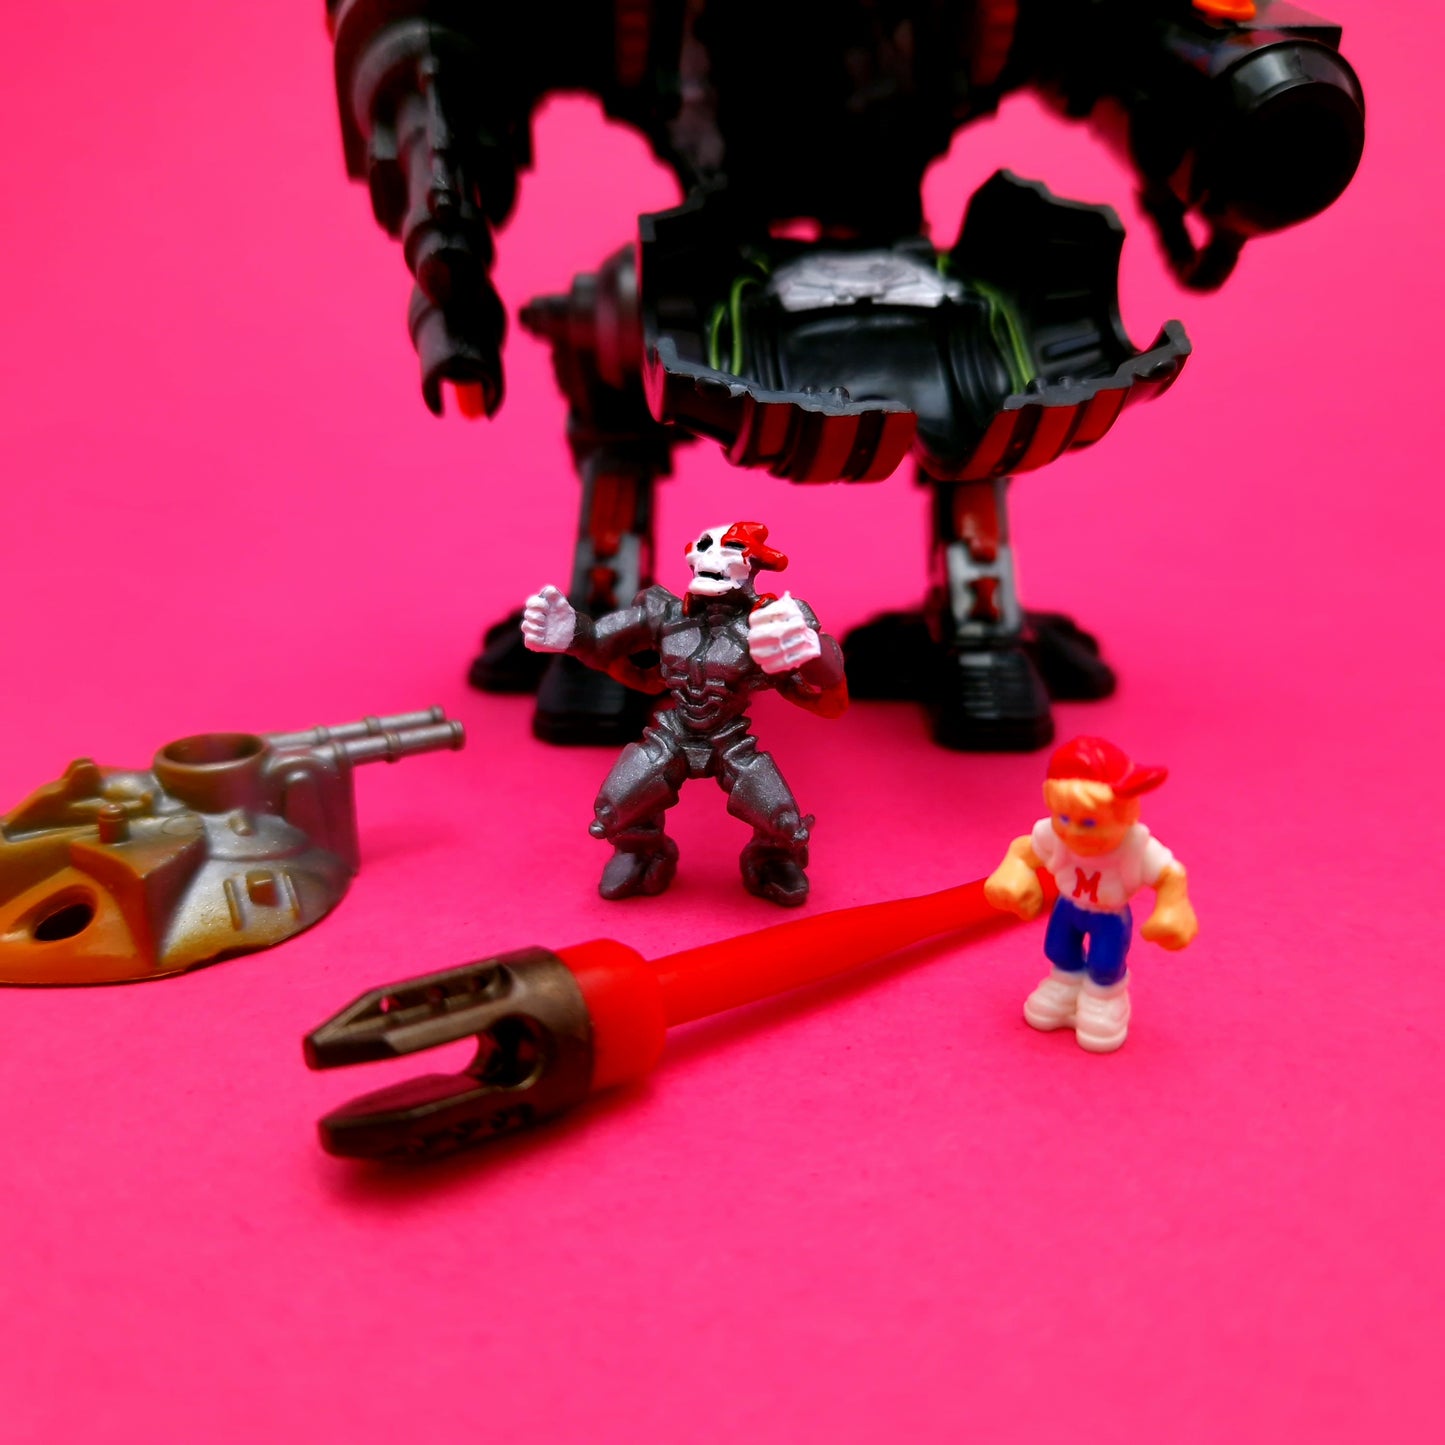 MIGHTY MAX ☆ SHUTS DOWN CYBOT Battle Warrior Vintage Figure Playset ☆ Near Complete Loose